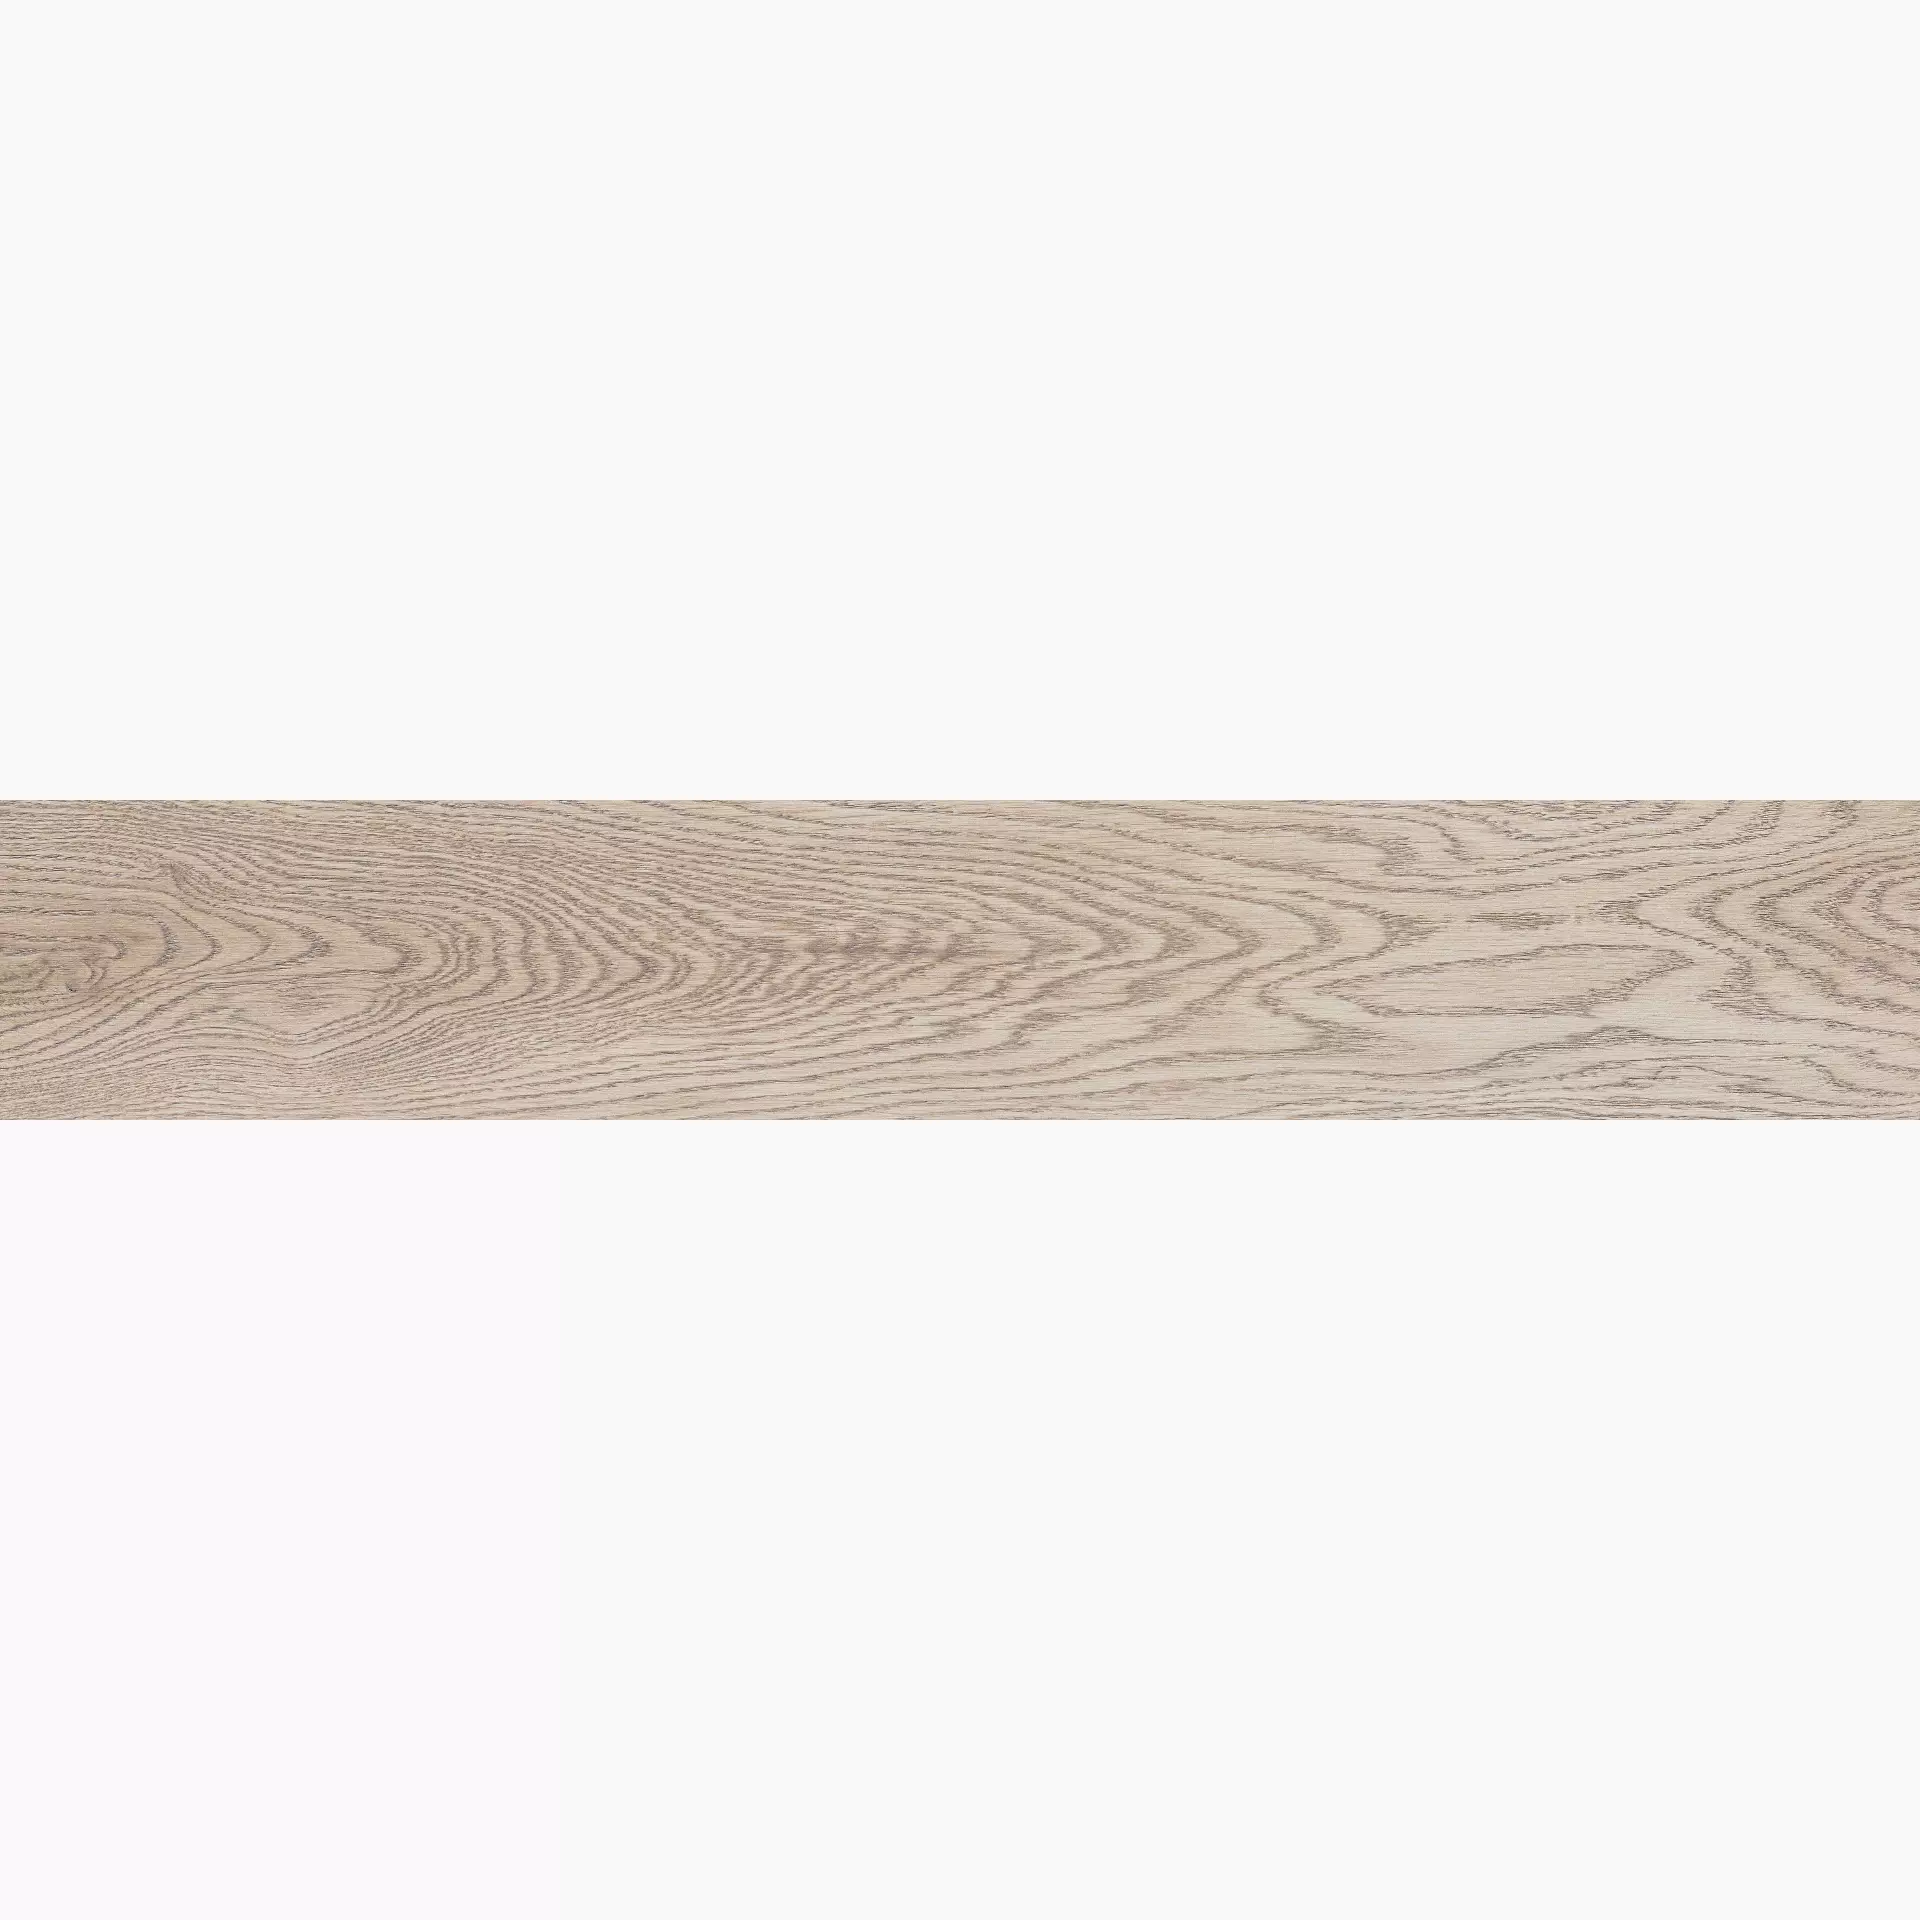 Flaviker Four Seasons Biscuit Naturale PF60011814 10x60cm rectified 8,5mm